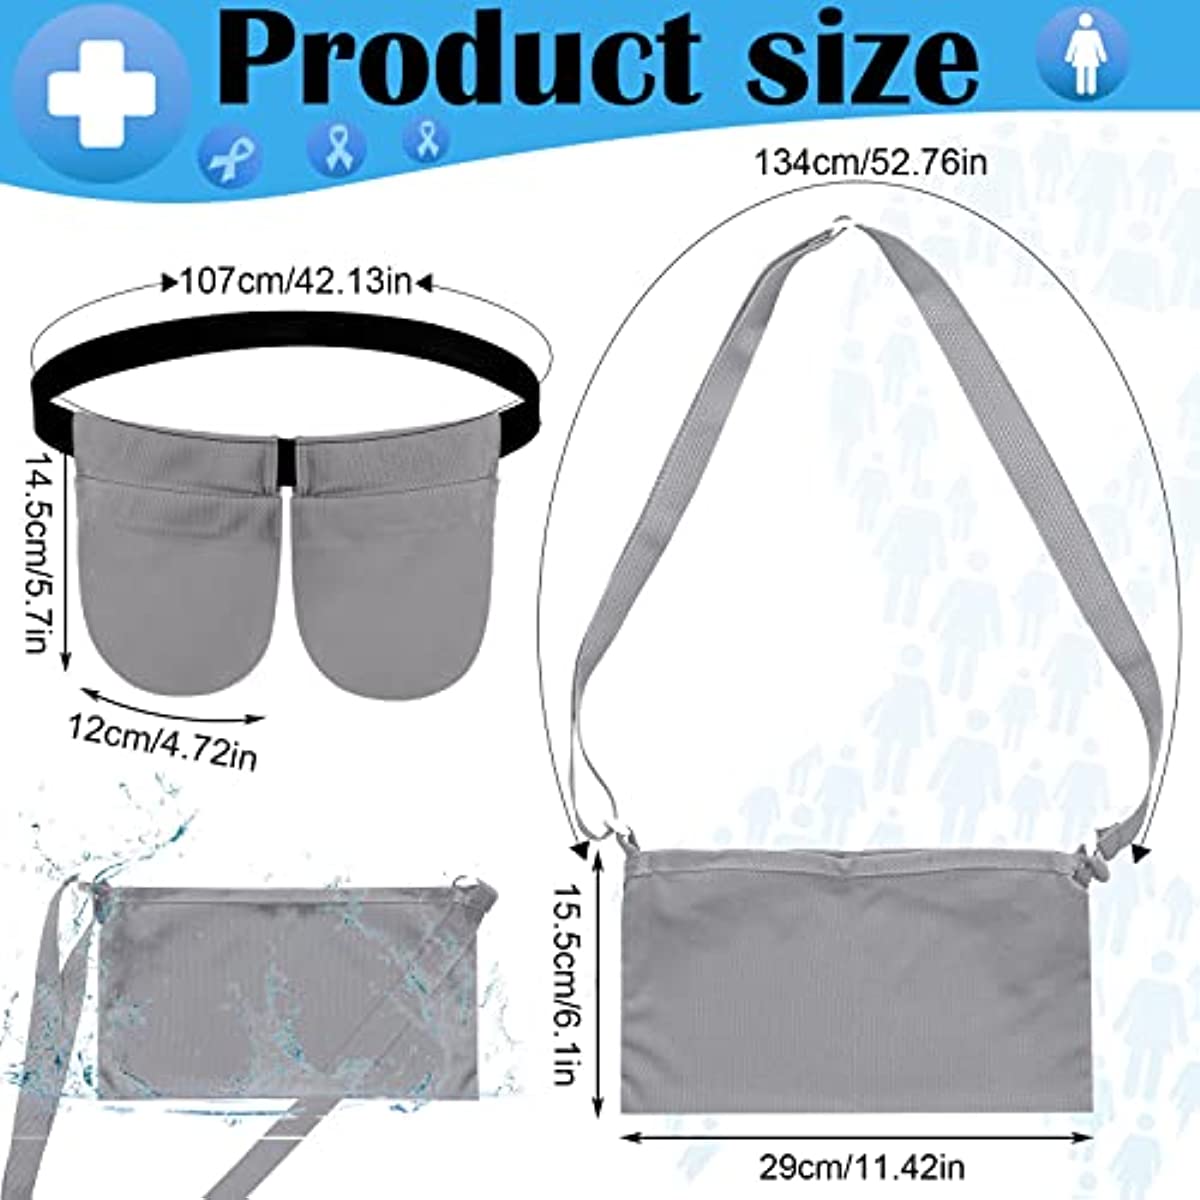 Tondiamo Mastectomy Drainage Pouch with Shower Bag Adjustable Mastectomy Drain Holder Waist Belt Breast Drainage Carrier for Mastectomy Breast Reduction Augmentation Recovery Support Patient Care Kit